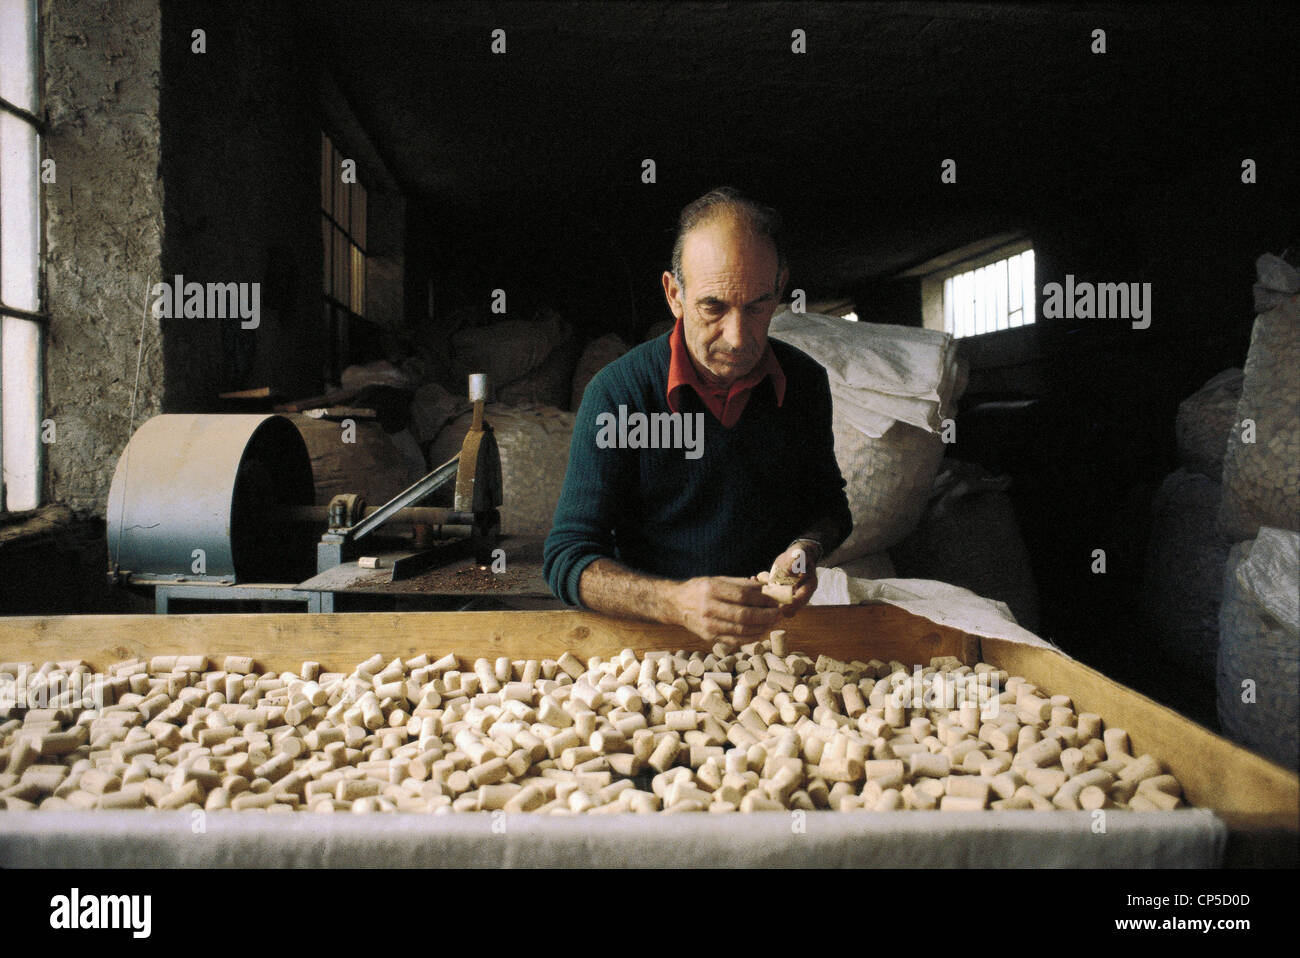 SARDINIA Calangianus SELECTION OF CORK STOPPERS IN A FACTORY Stock Photo